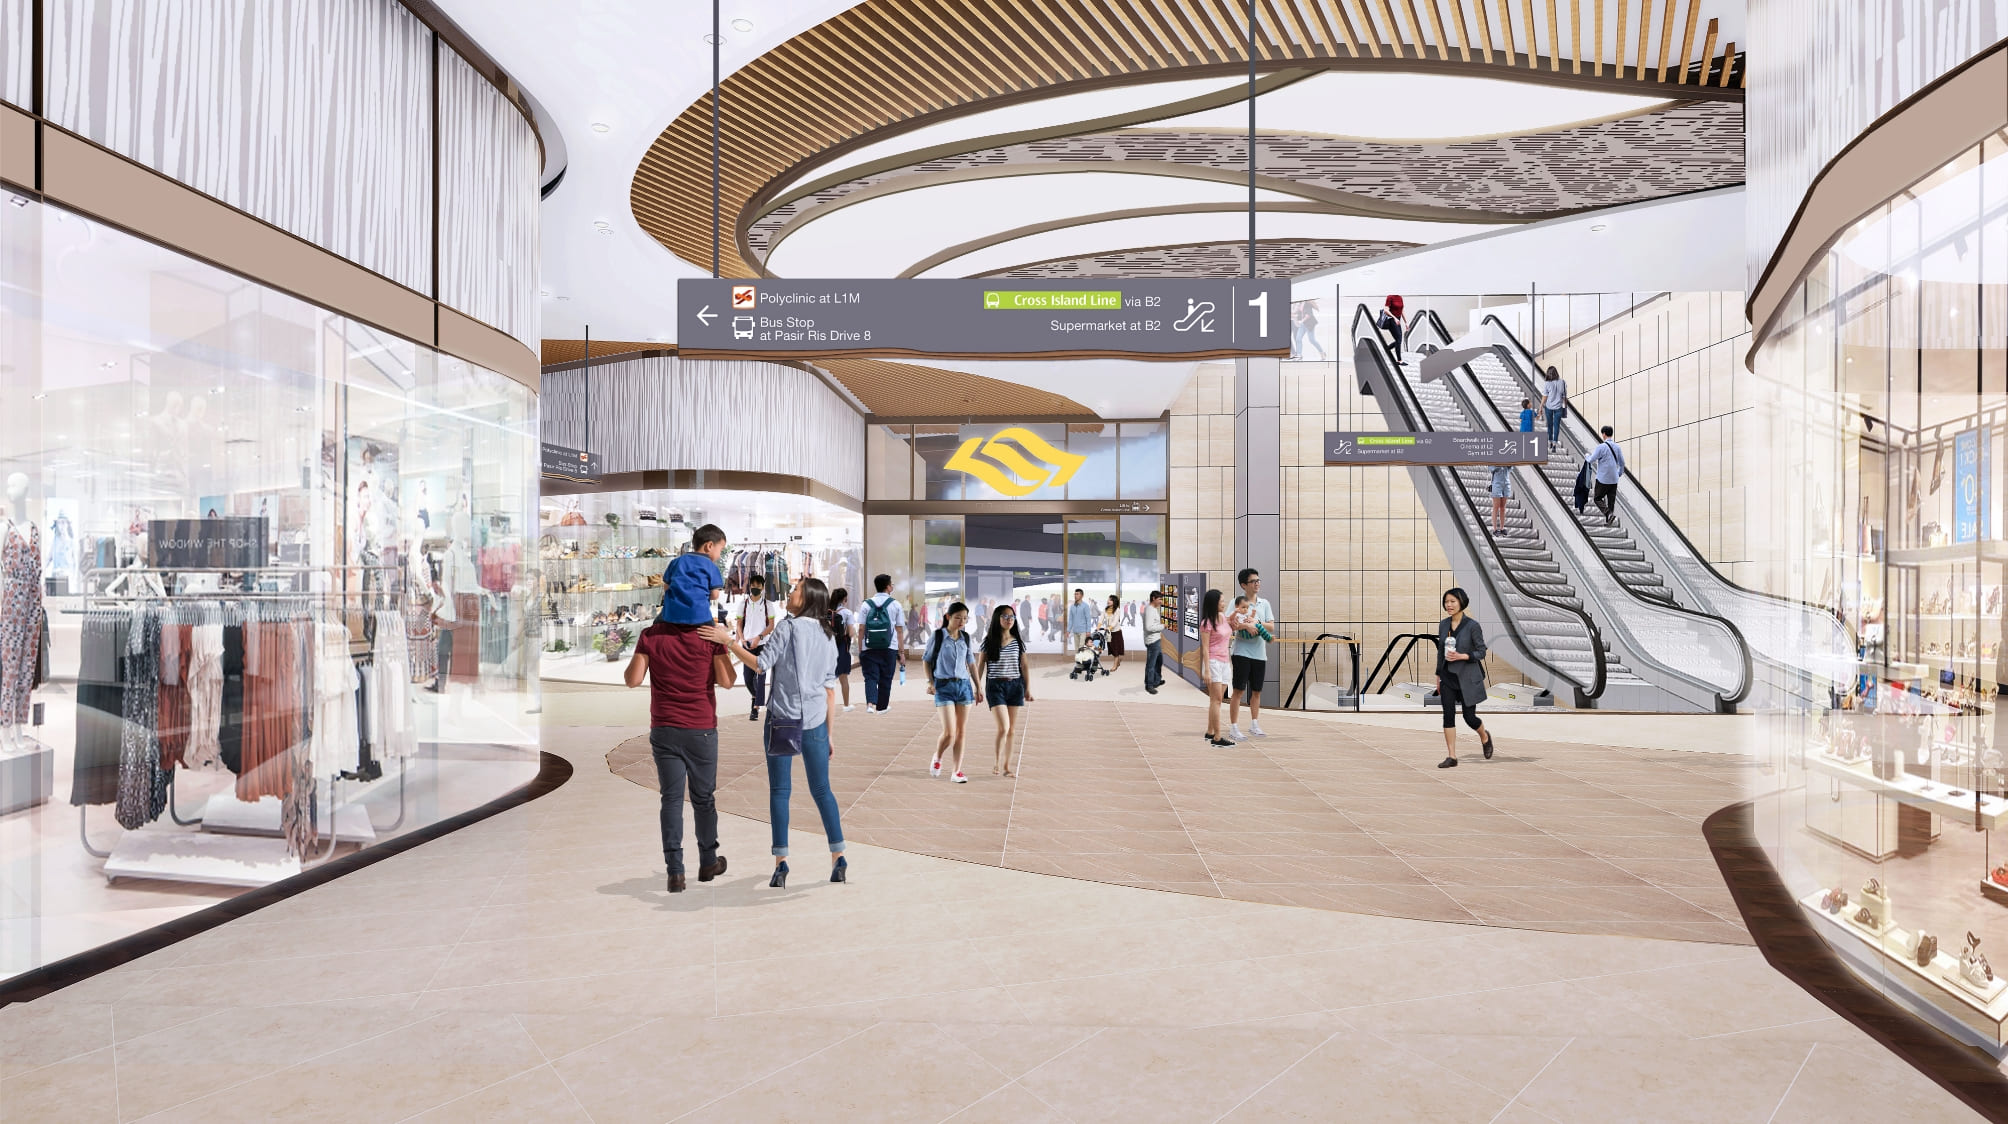 Pasir Ris Mall connects to MRT Stations and Bus Interchange